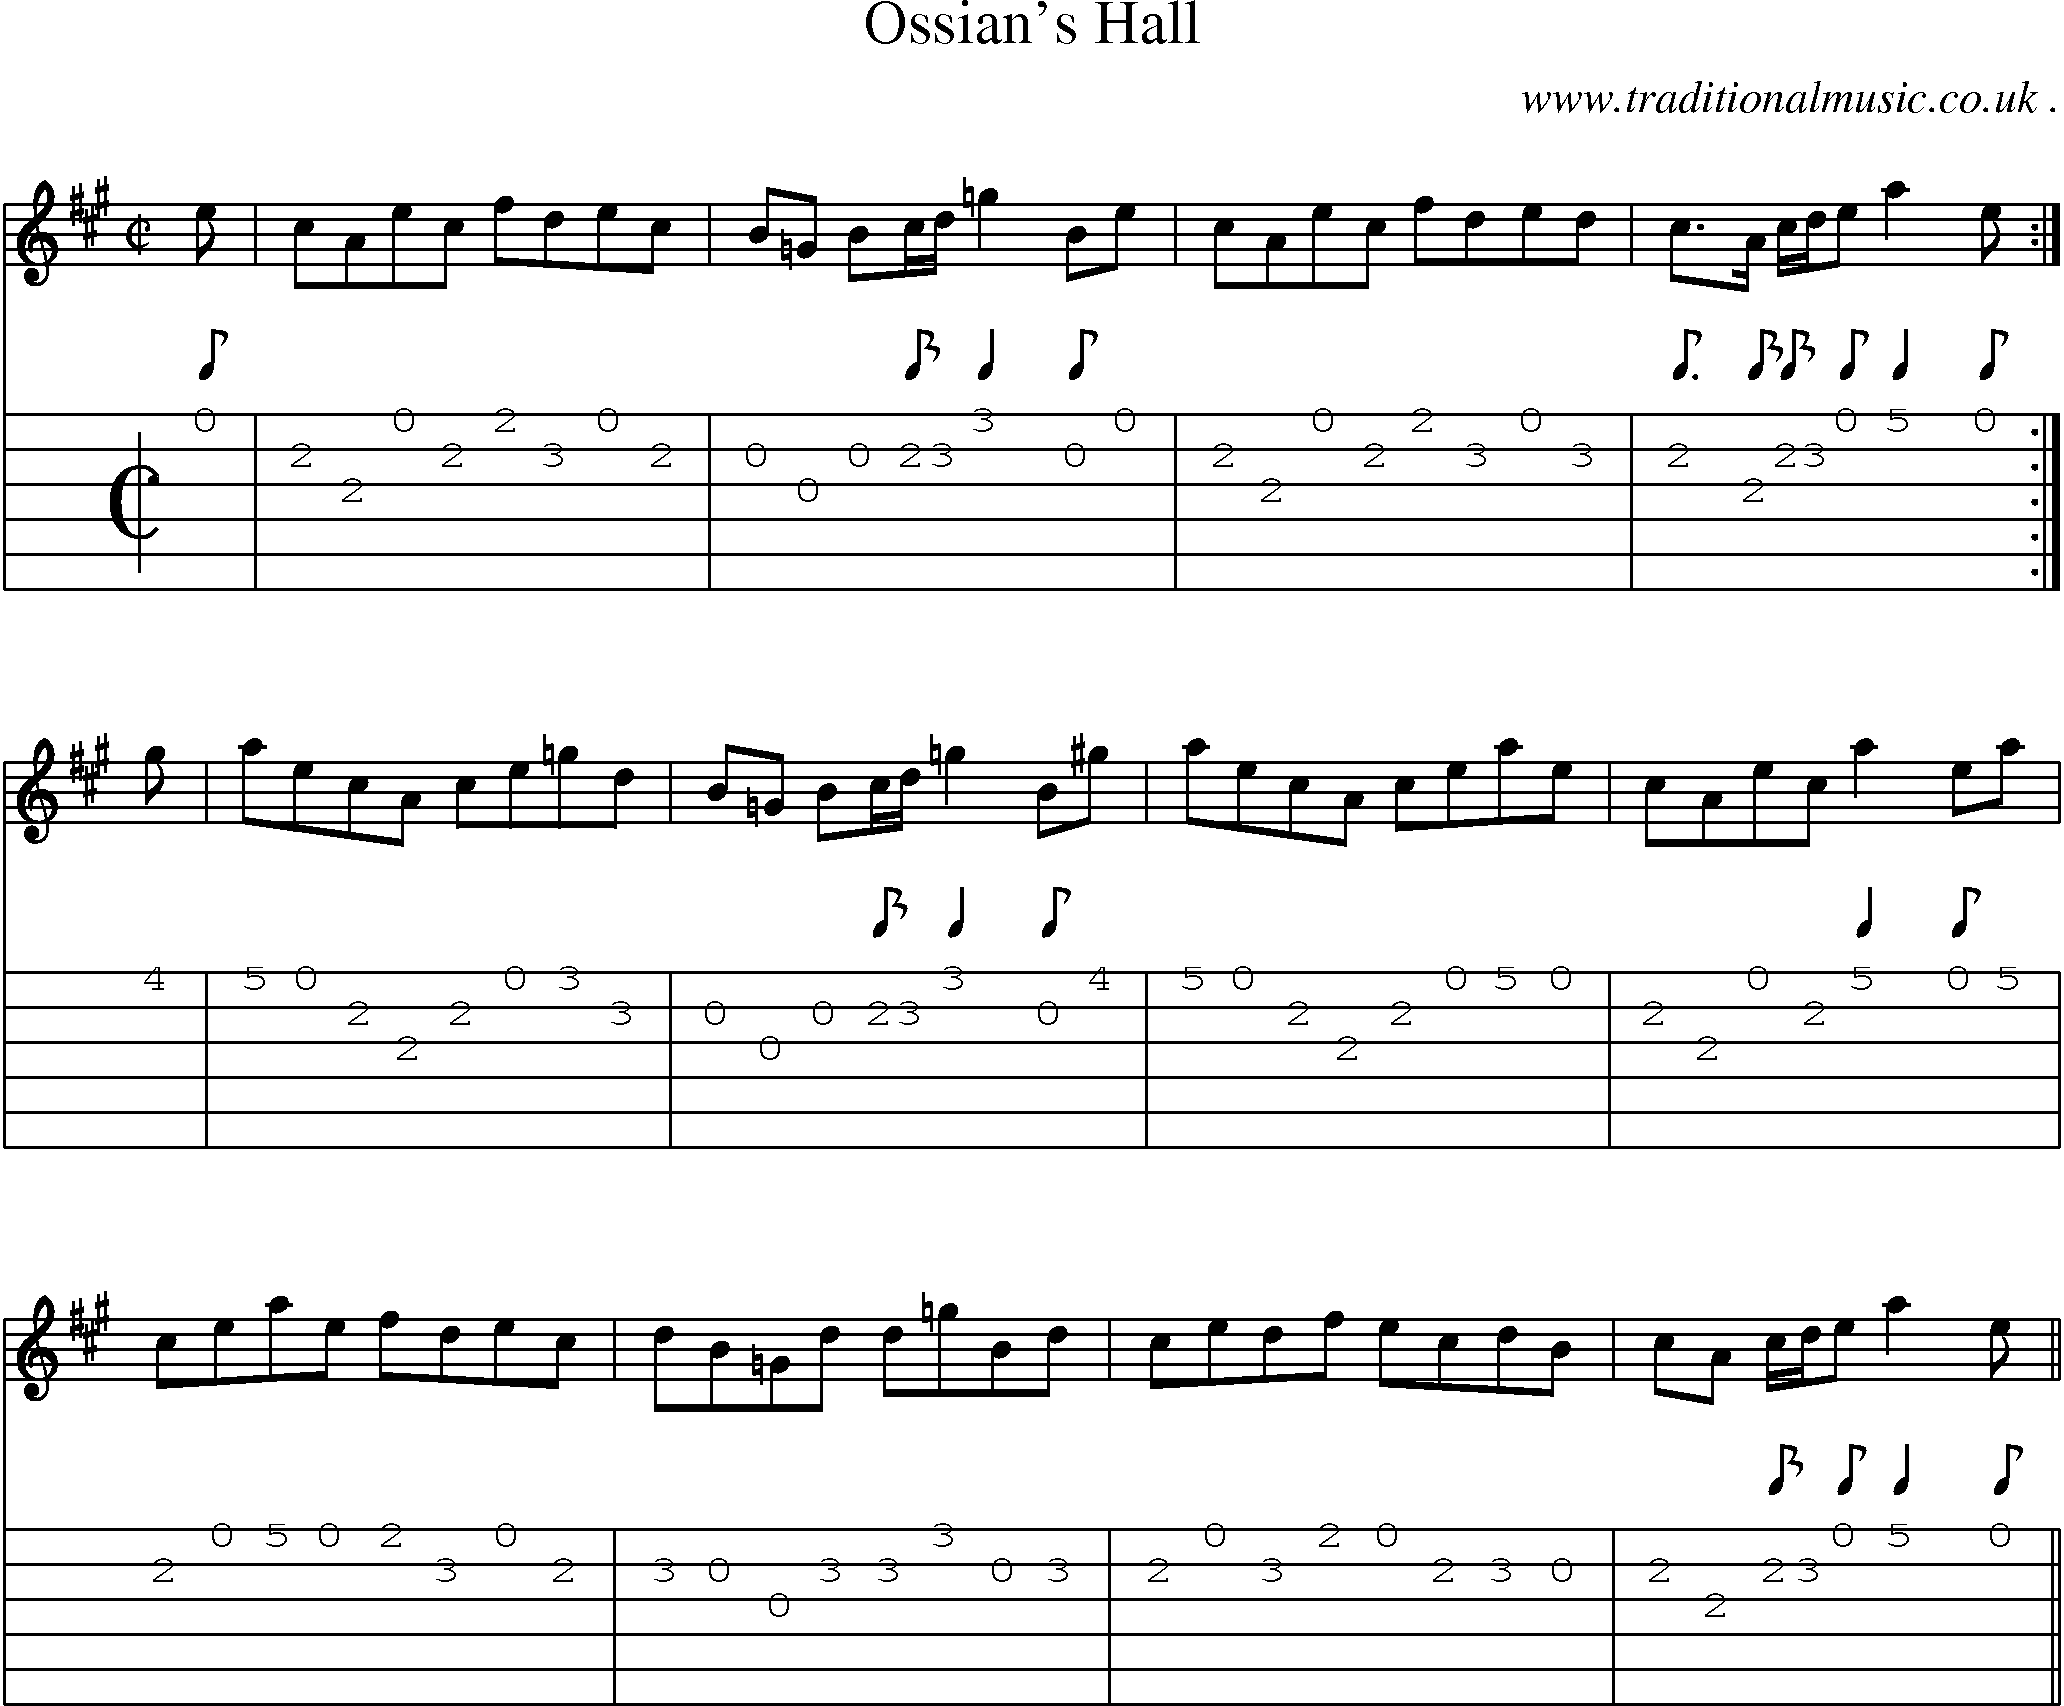 Sheet-music  score, Chords and Guitar Tabs for Ossians Hall